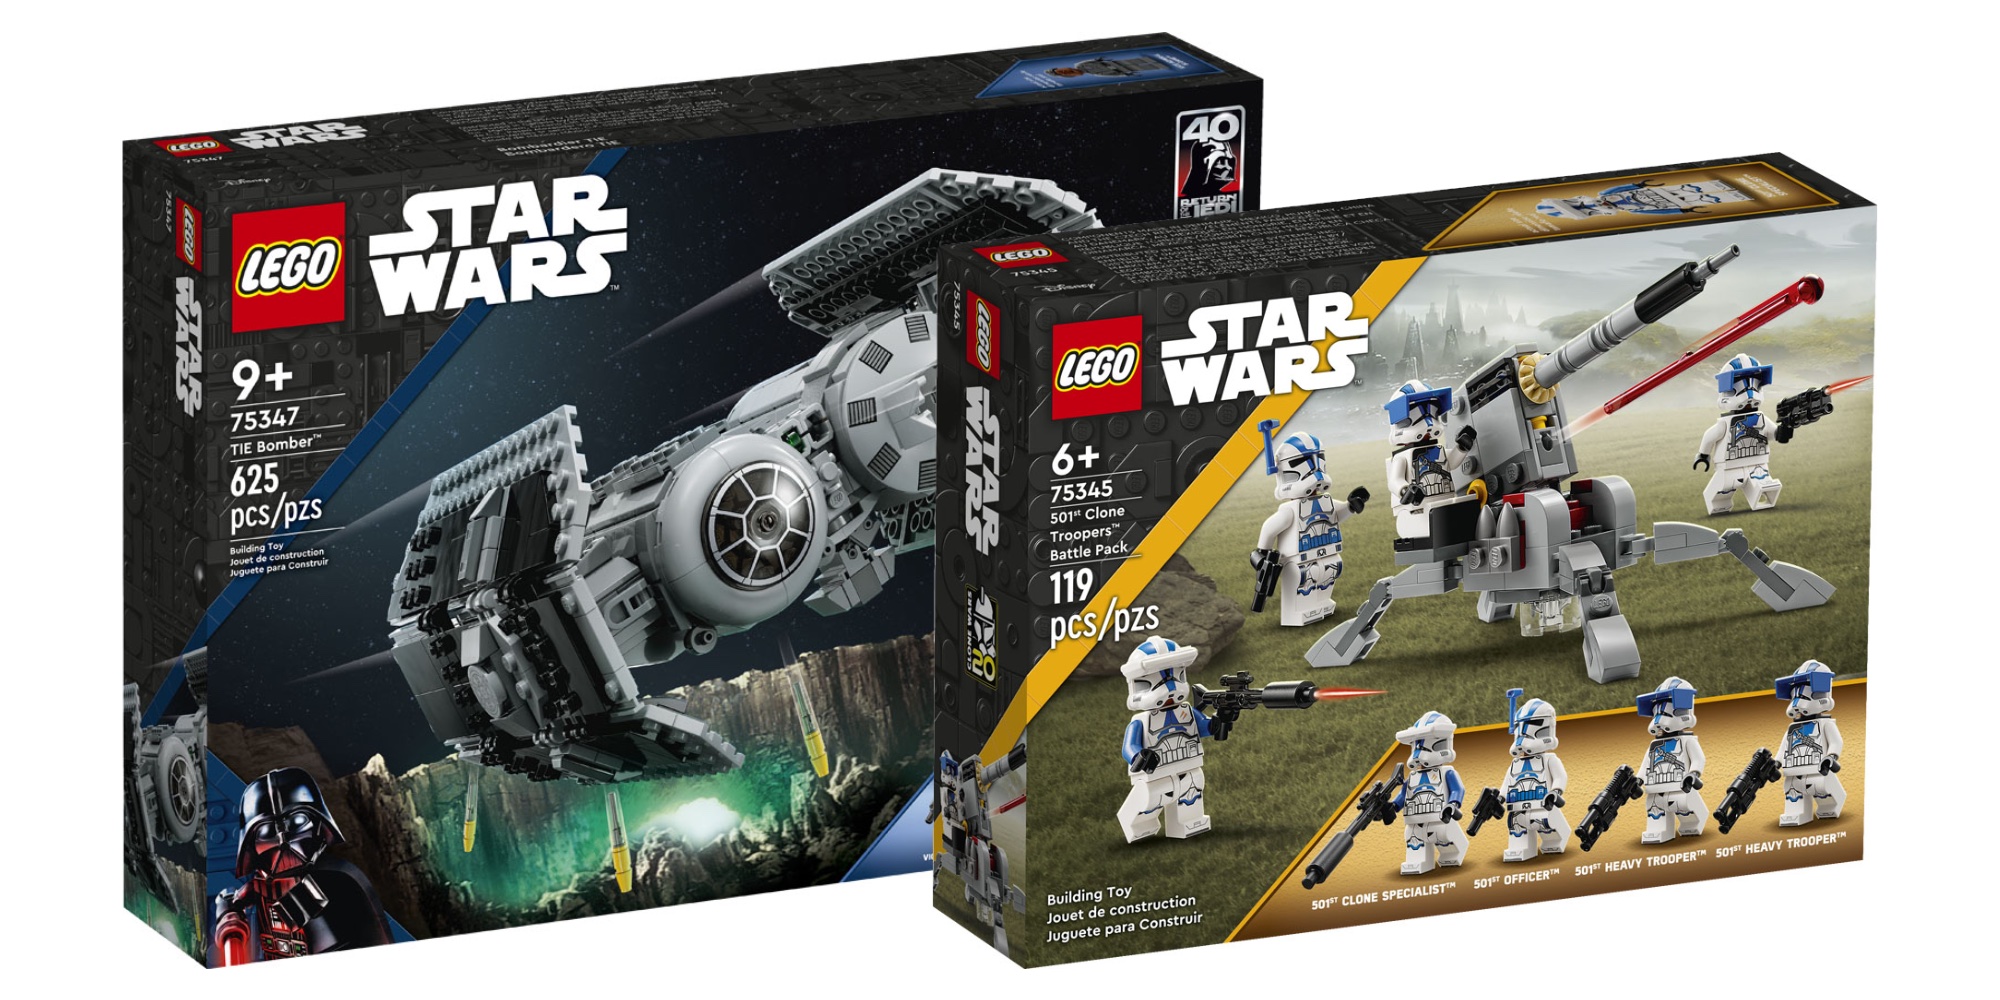 LEGO Star Wars 2023 sets officially revealed for January 1